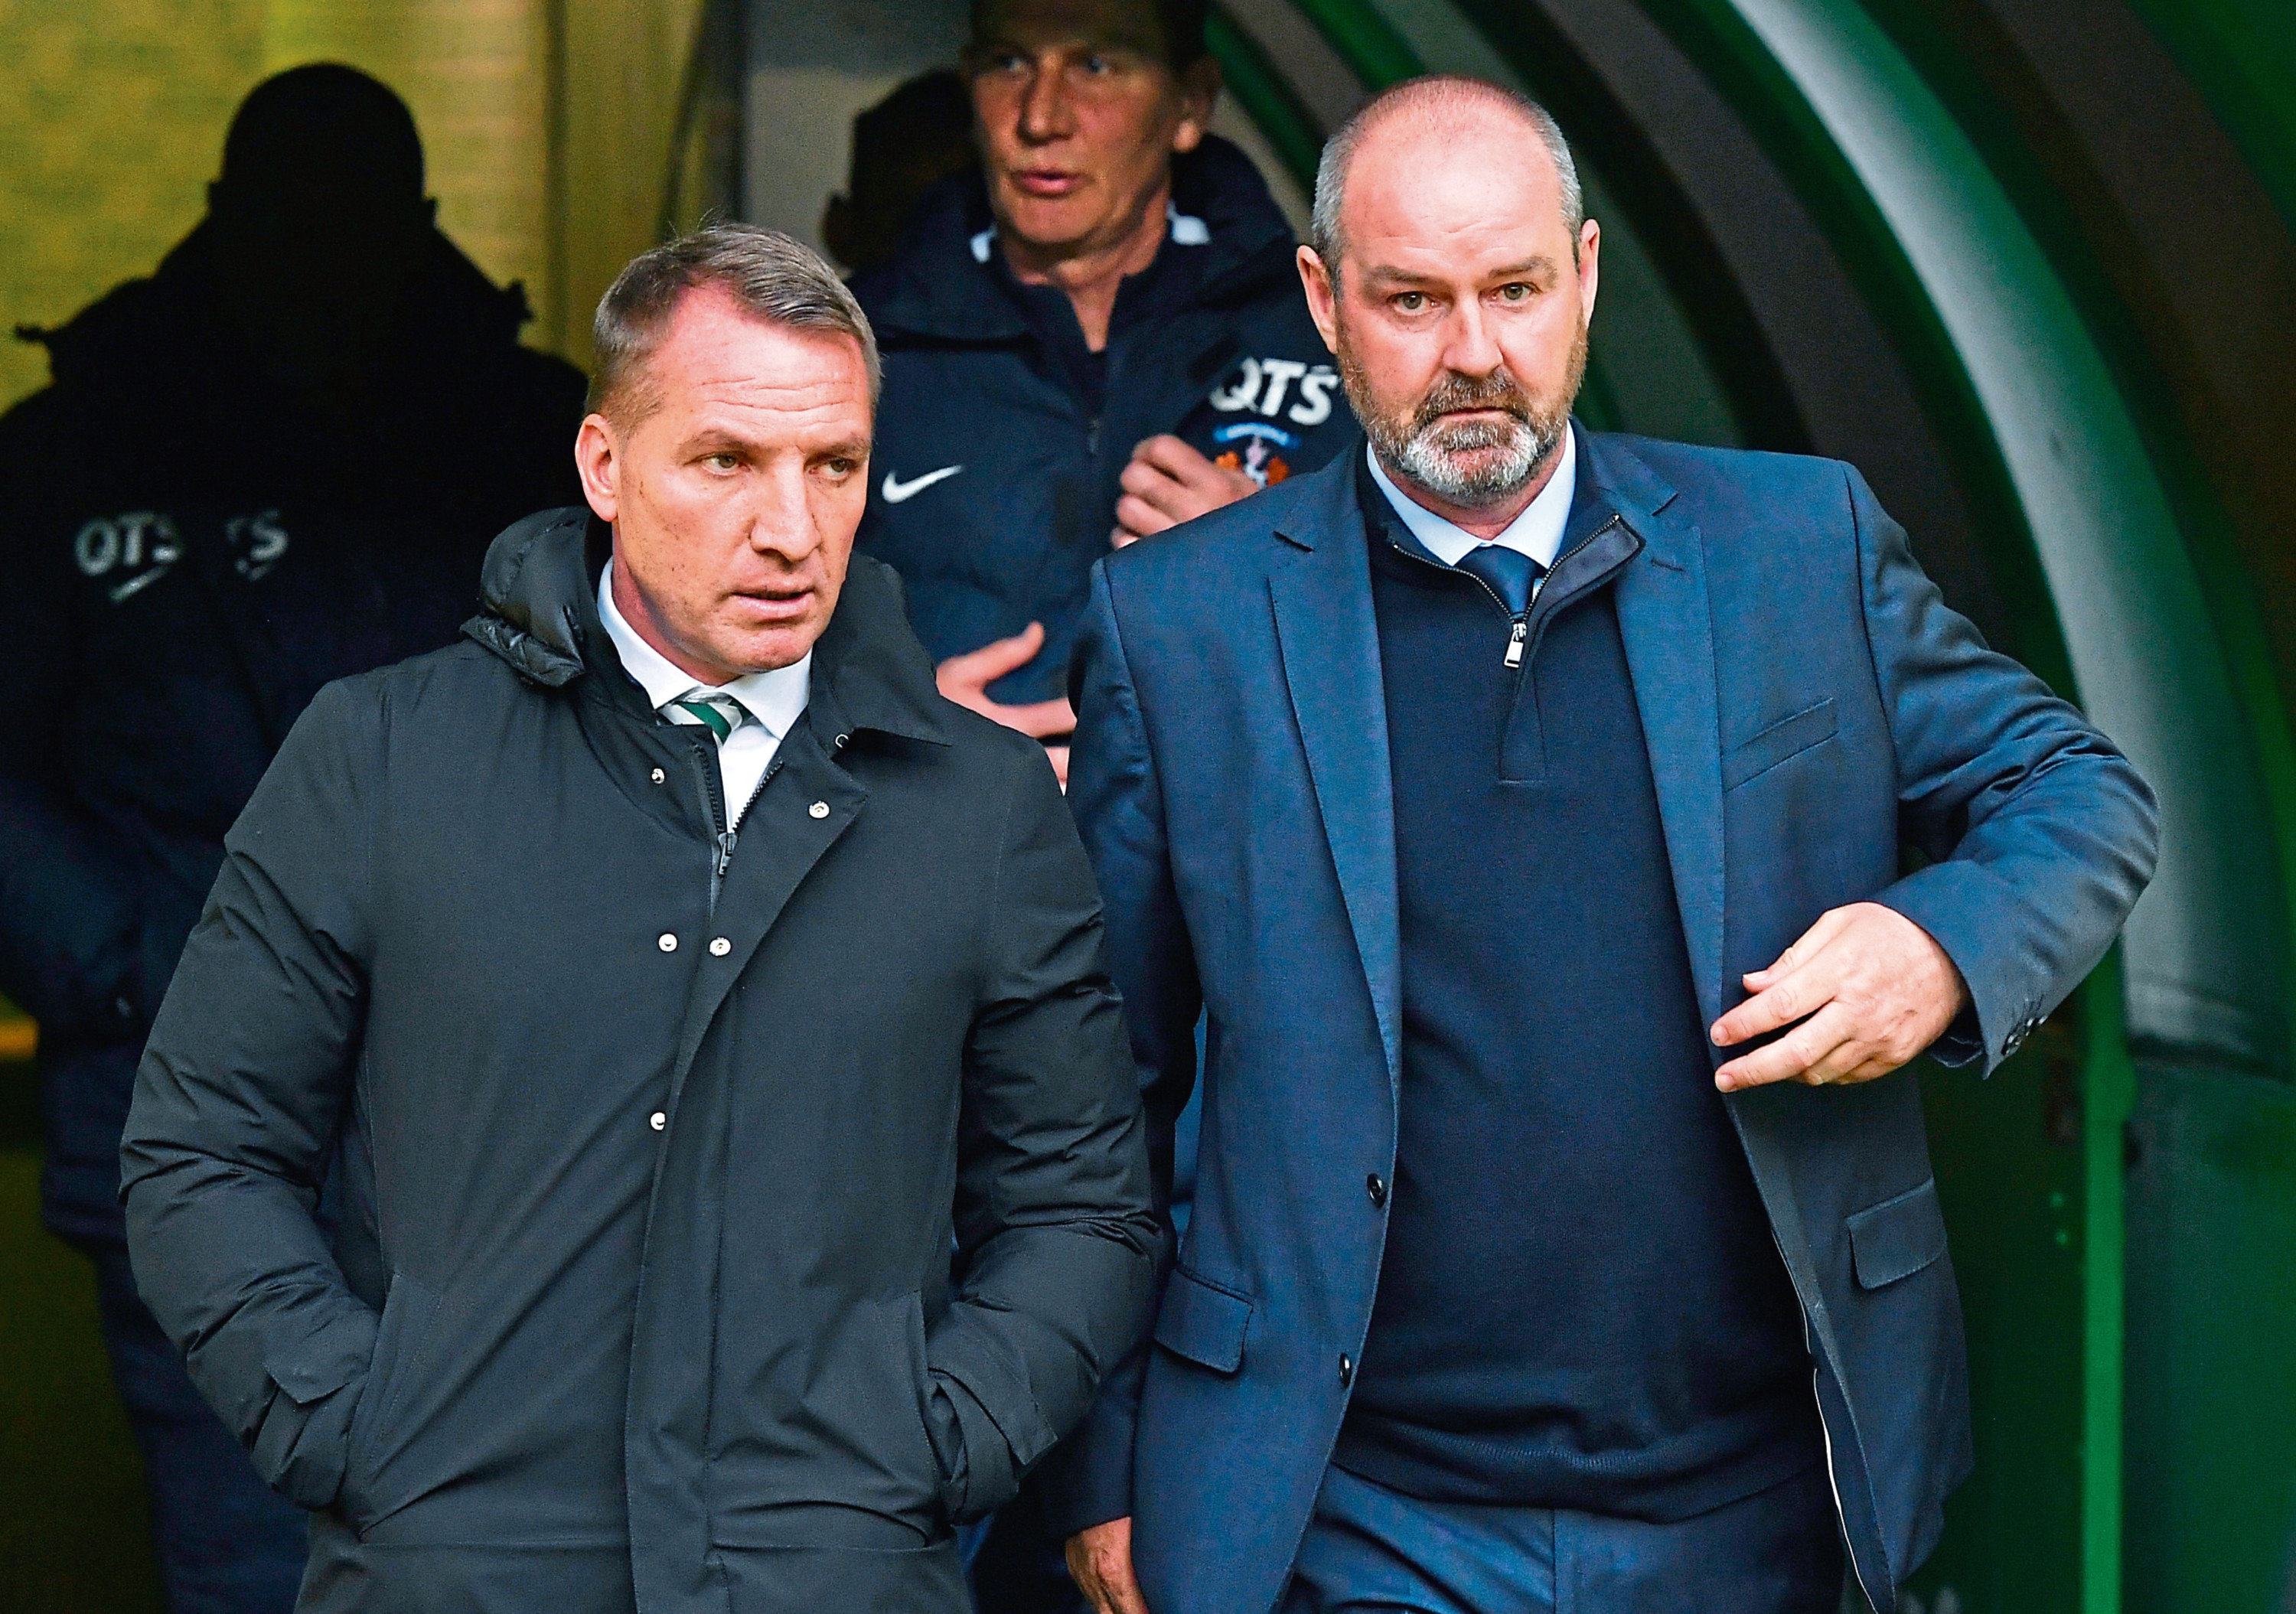 Celtic manager Brendan Rodgers and Kilmarnock manager Steve Clarke emerge from the tunnel